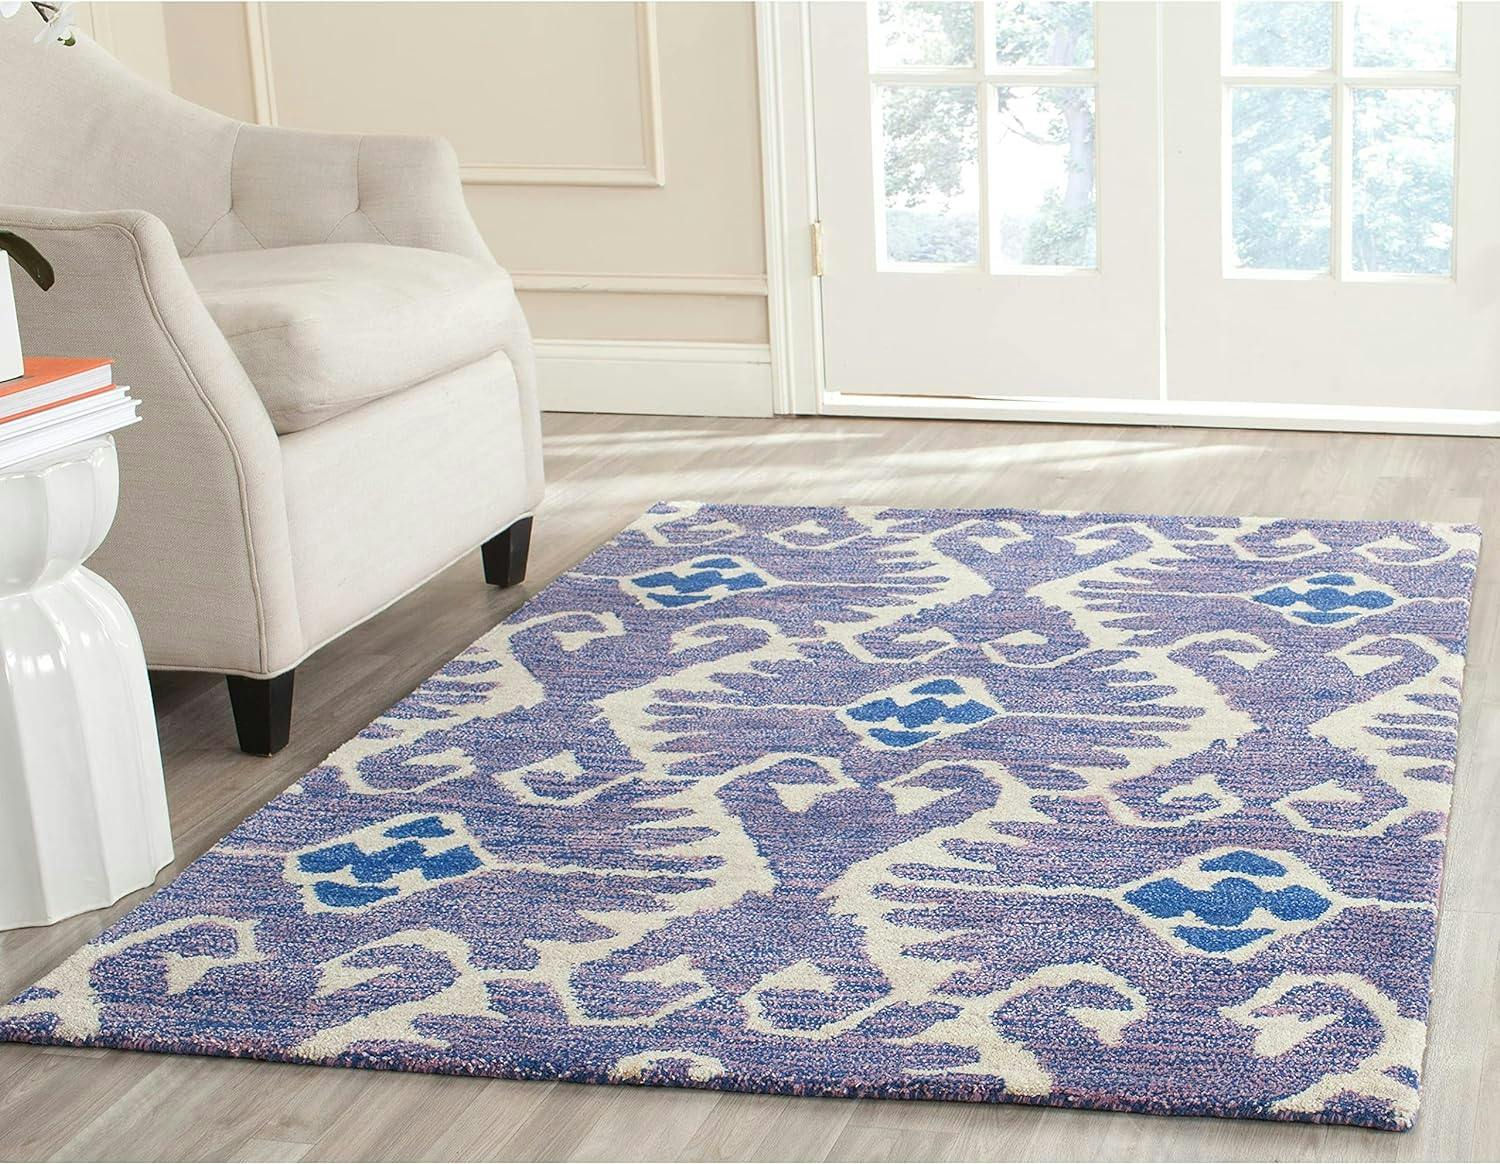 Ivory Square Hand-Tufted Wool Non-Slip Accent Rug 24"